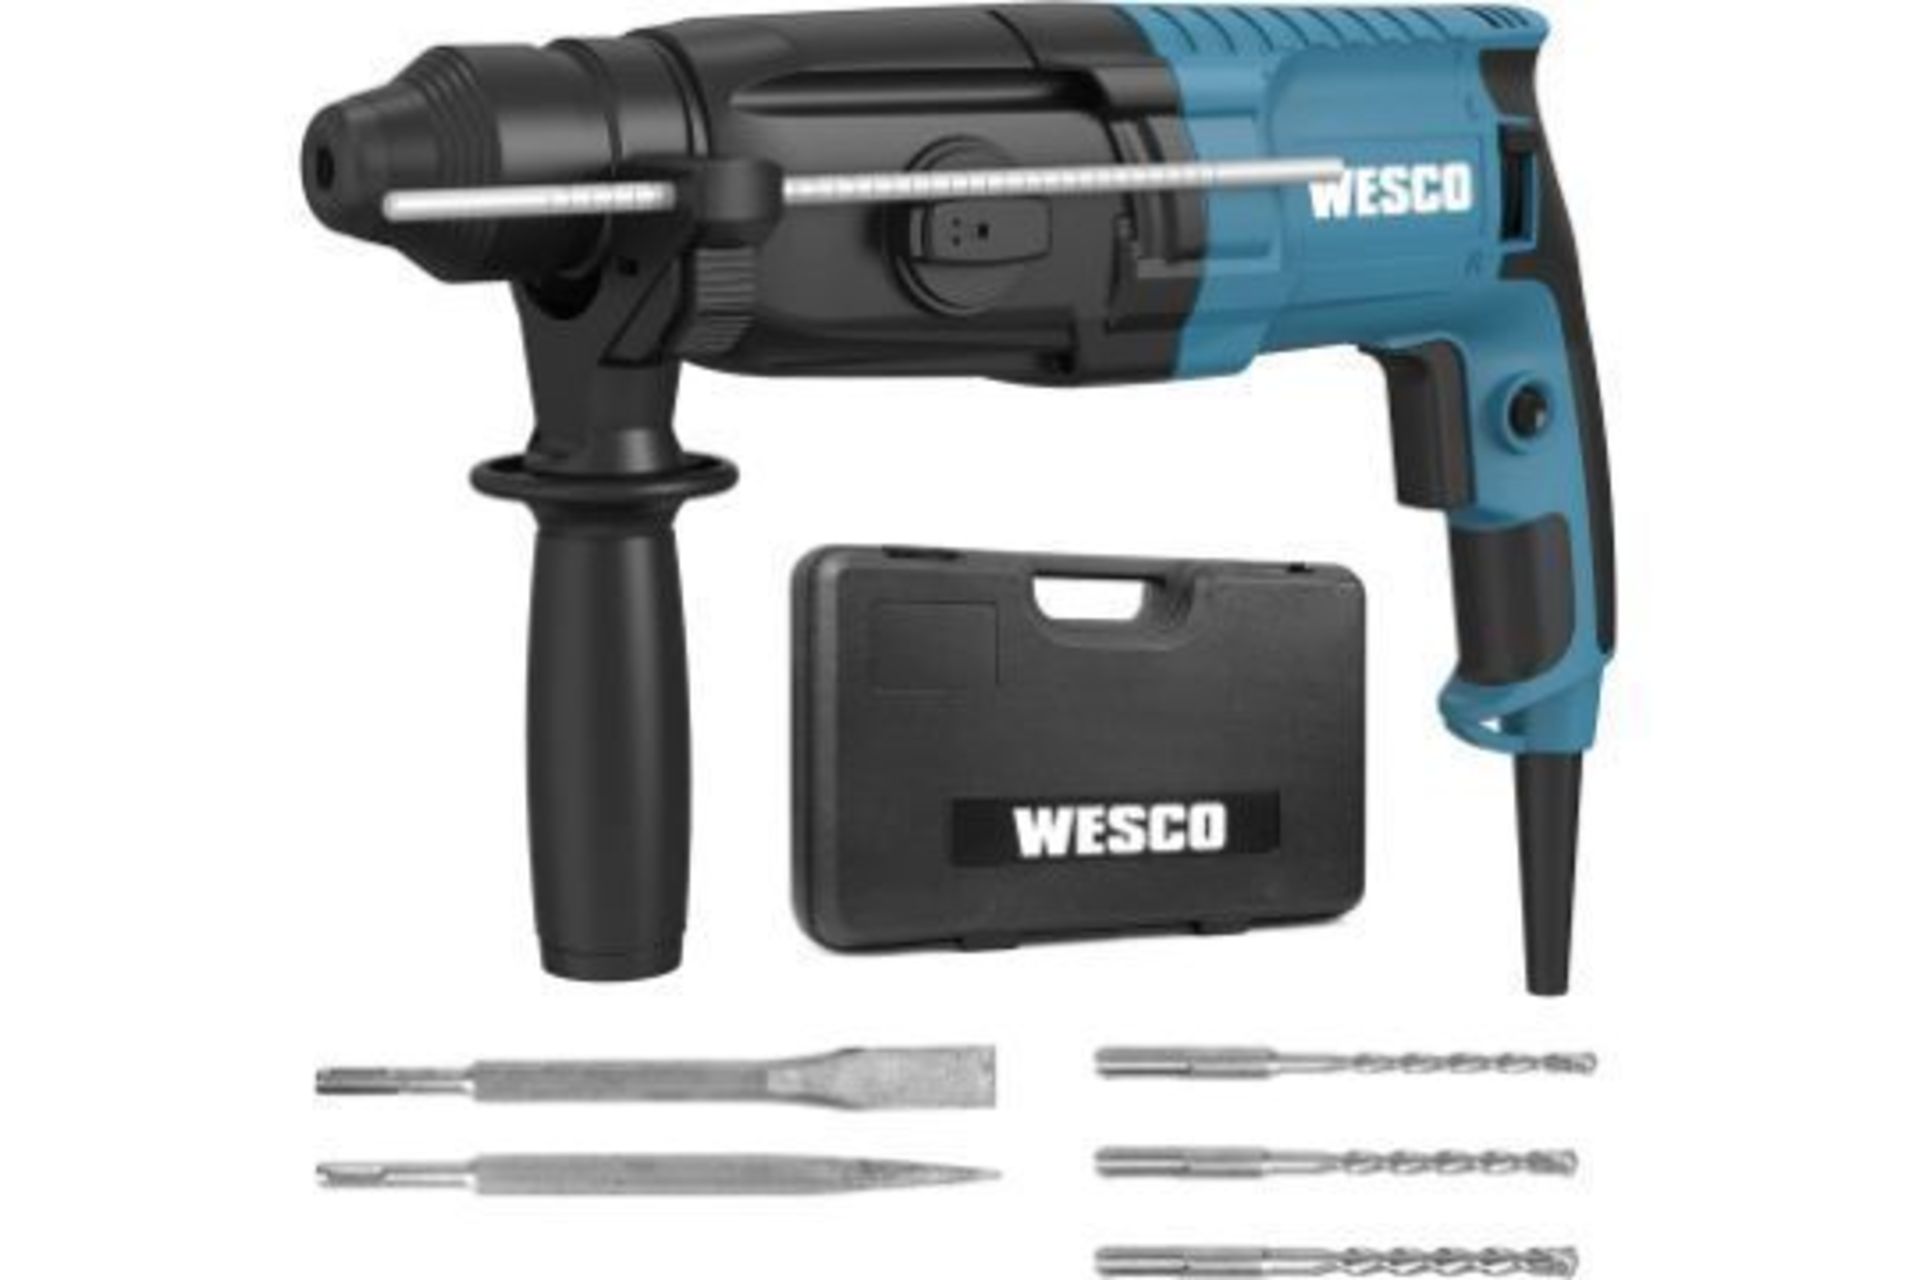 2 x NEW BOXED WESCO 800W SDS Plus Rotary Hammer Drill, 3 Modes in 1, 2.8J Impact Energy, Variable-